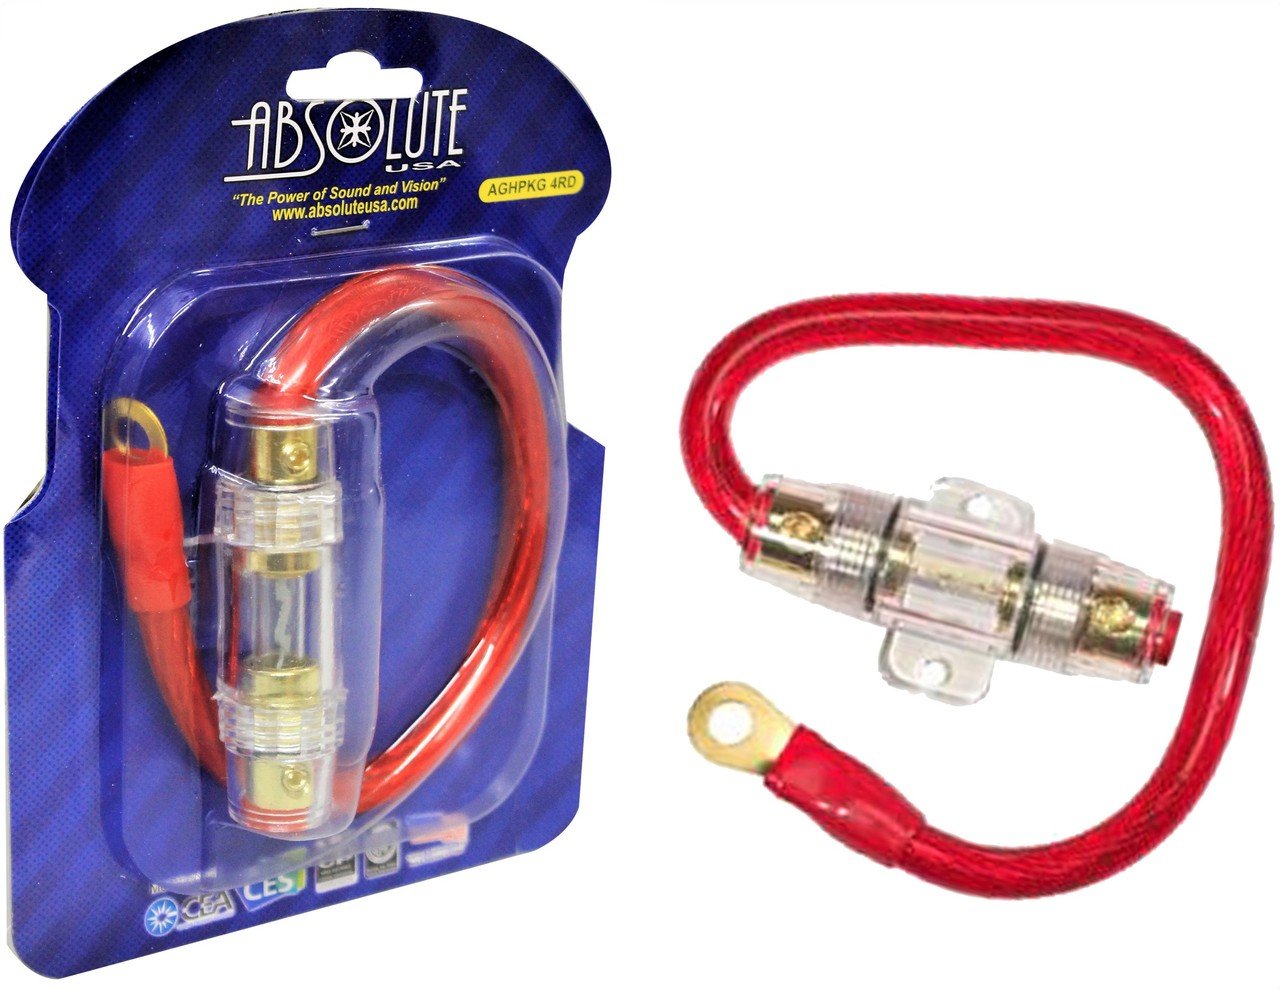 Absolute AGHPKG4RD Pro Series AGU Fuse Holder & 12" 4 Ga OFC Power Cable 60A Fuse